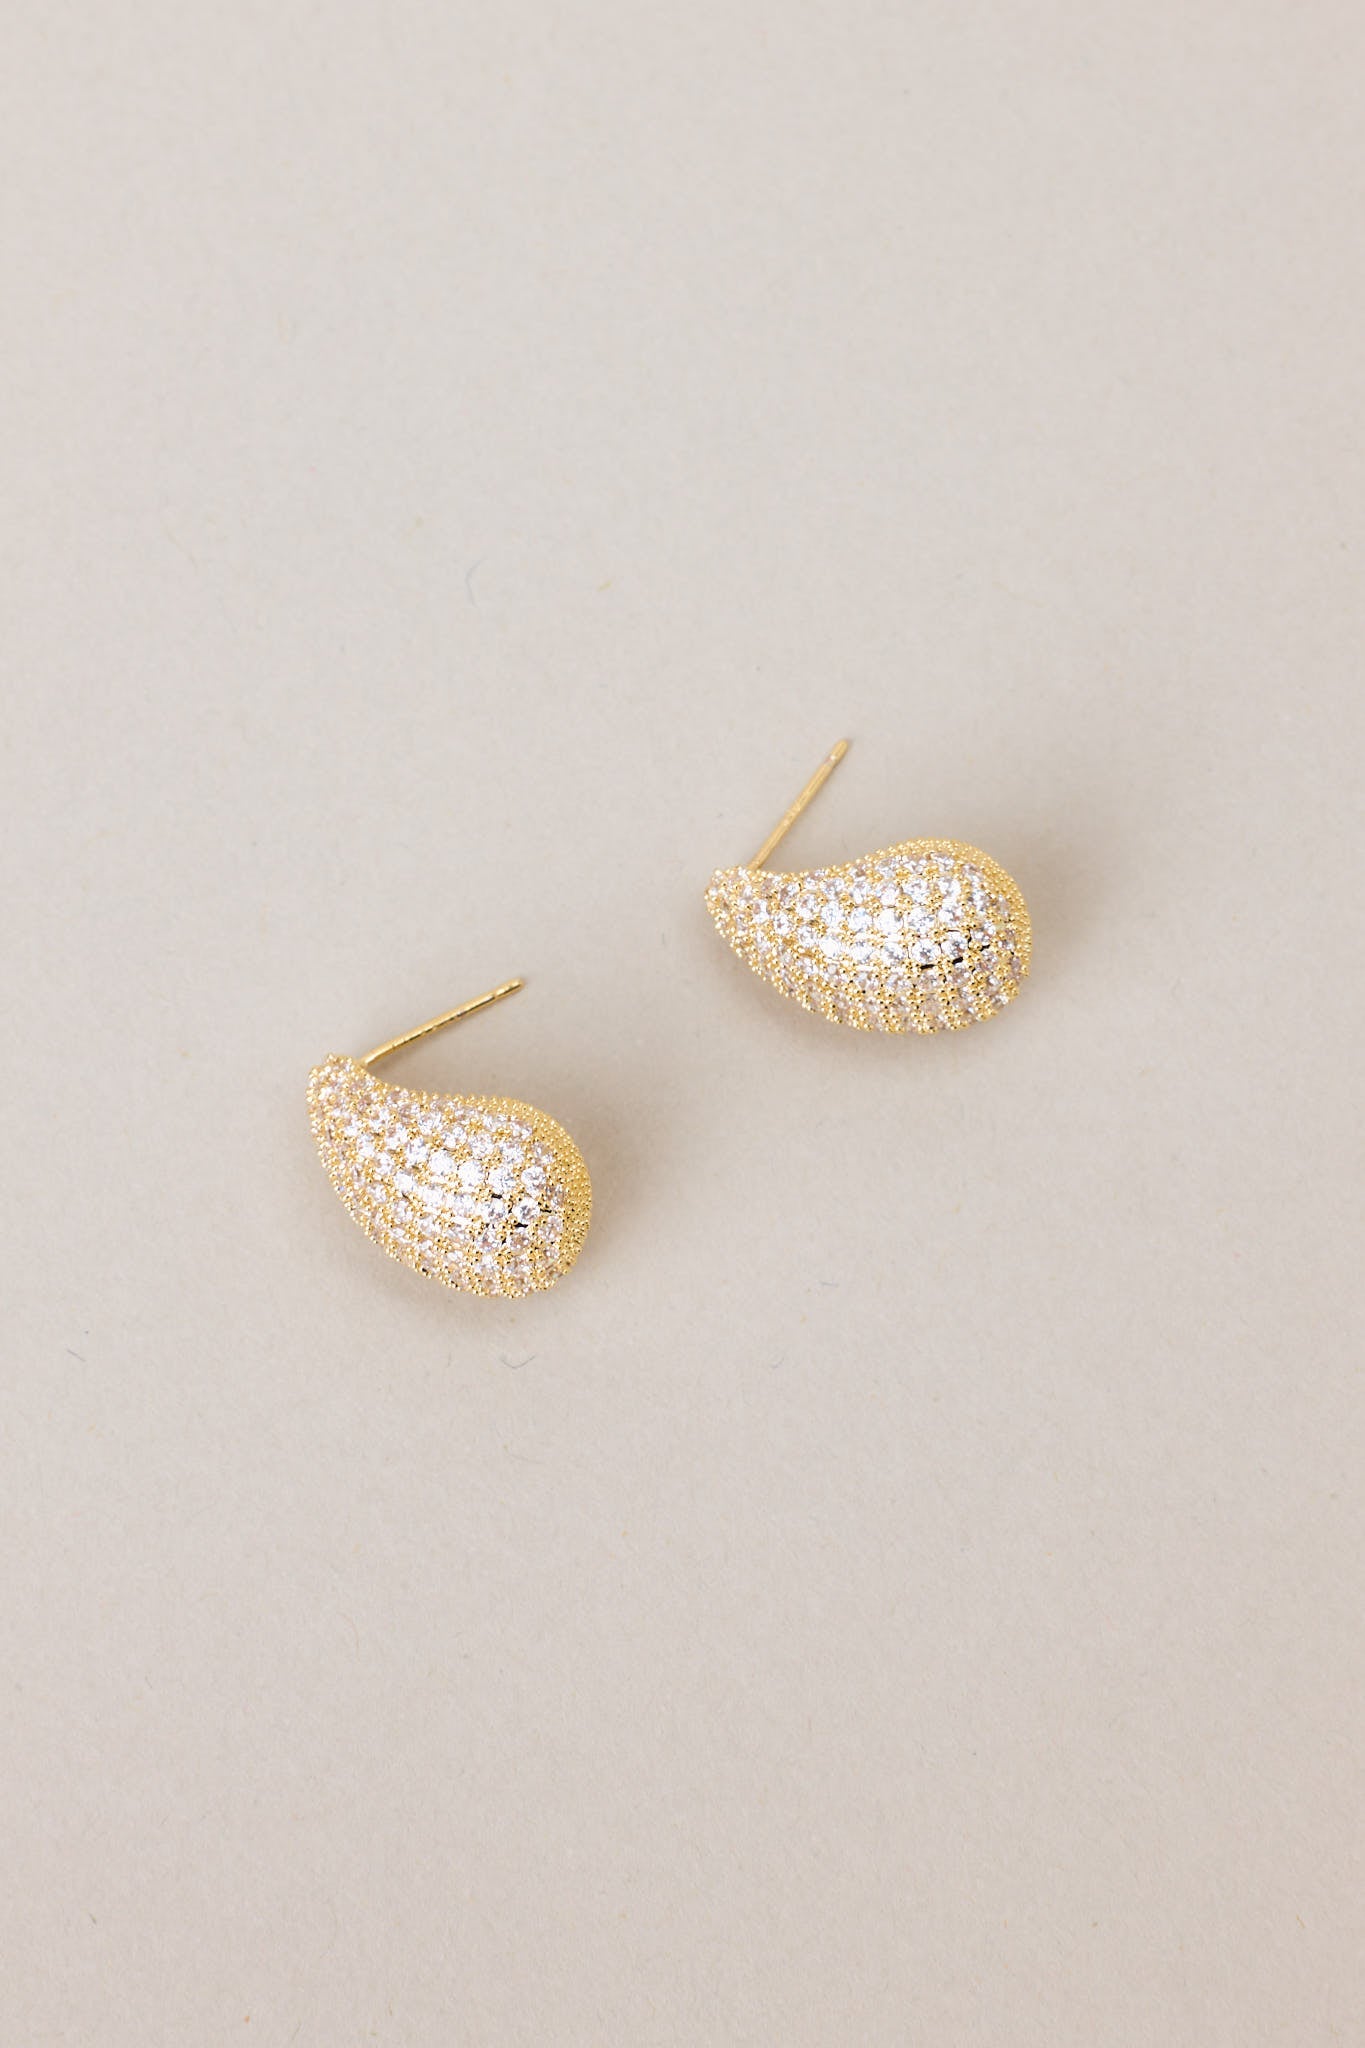 Full view of these tear shaped yellow gold earring with mini rhinestones covering it, and gold hardware.